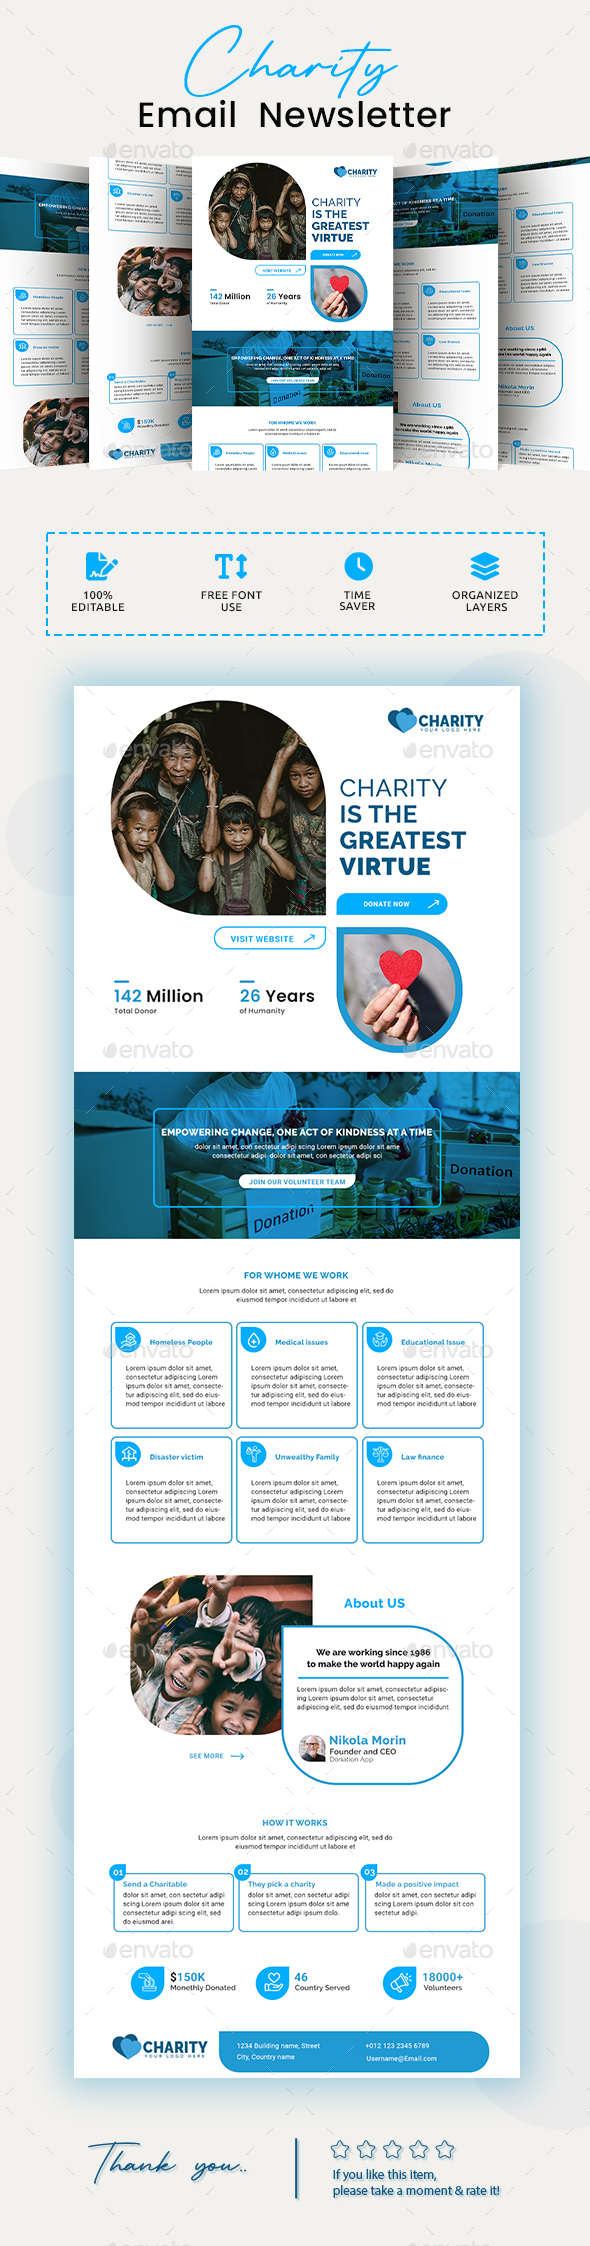 Charity Email Newsletter PSD Template